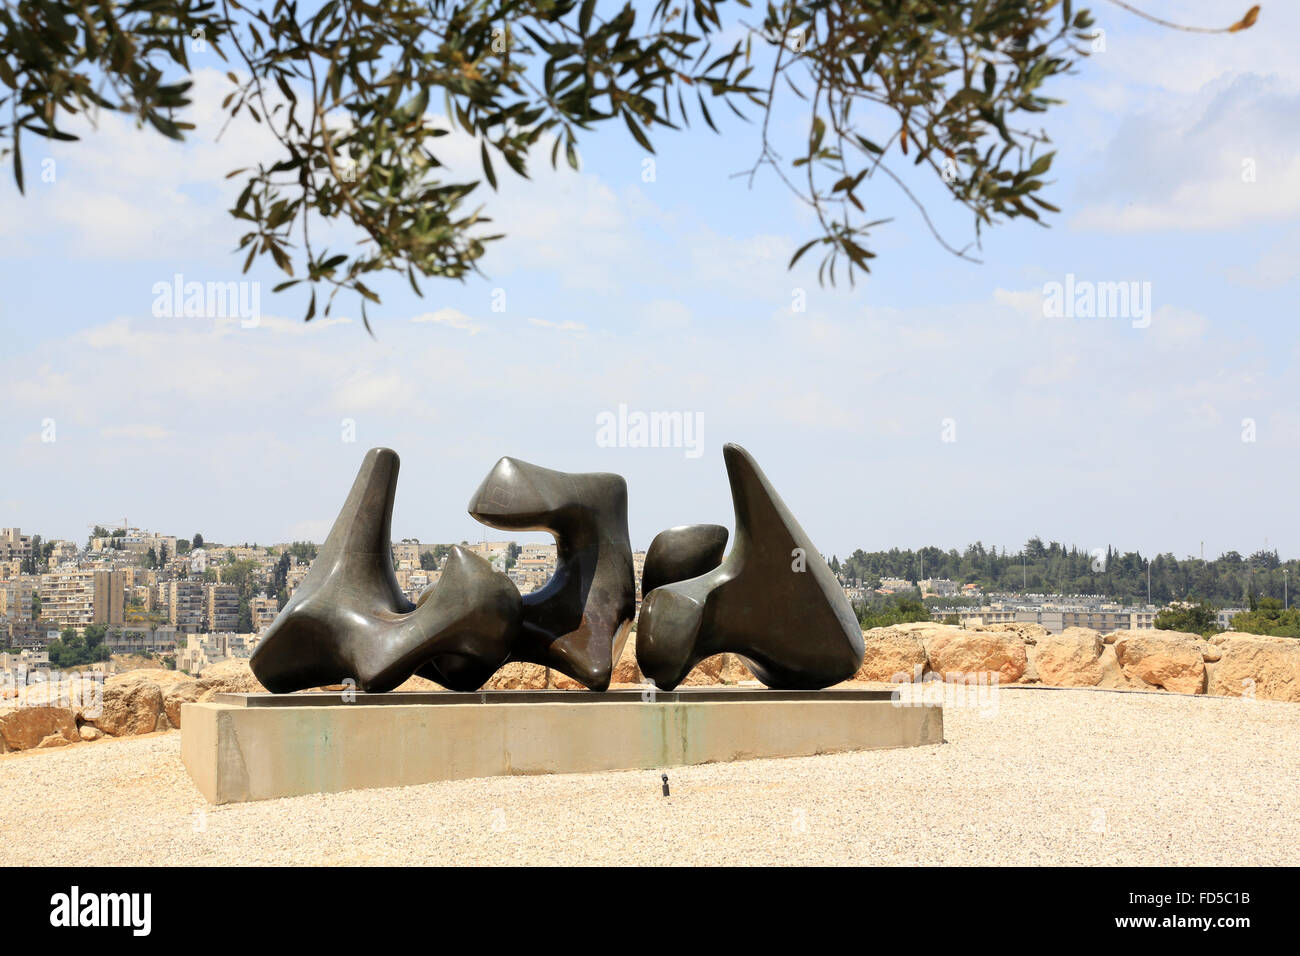 Three pieces sculpture vertebrae by Henry Moore. 1968-1969. Billy Rose Art Garden. The Israel Museum. Stock Photo